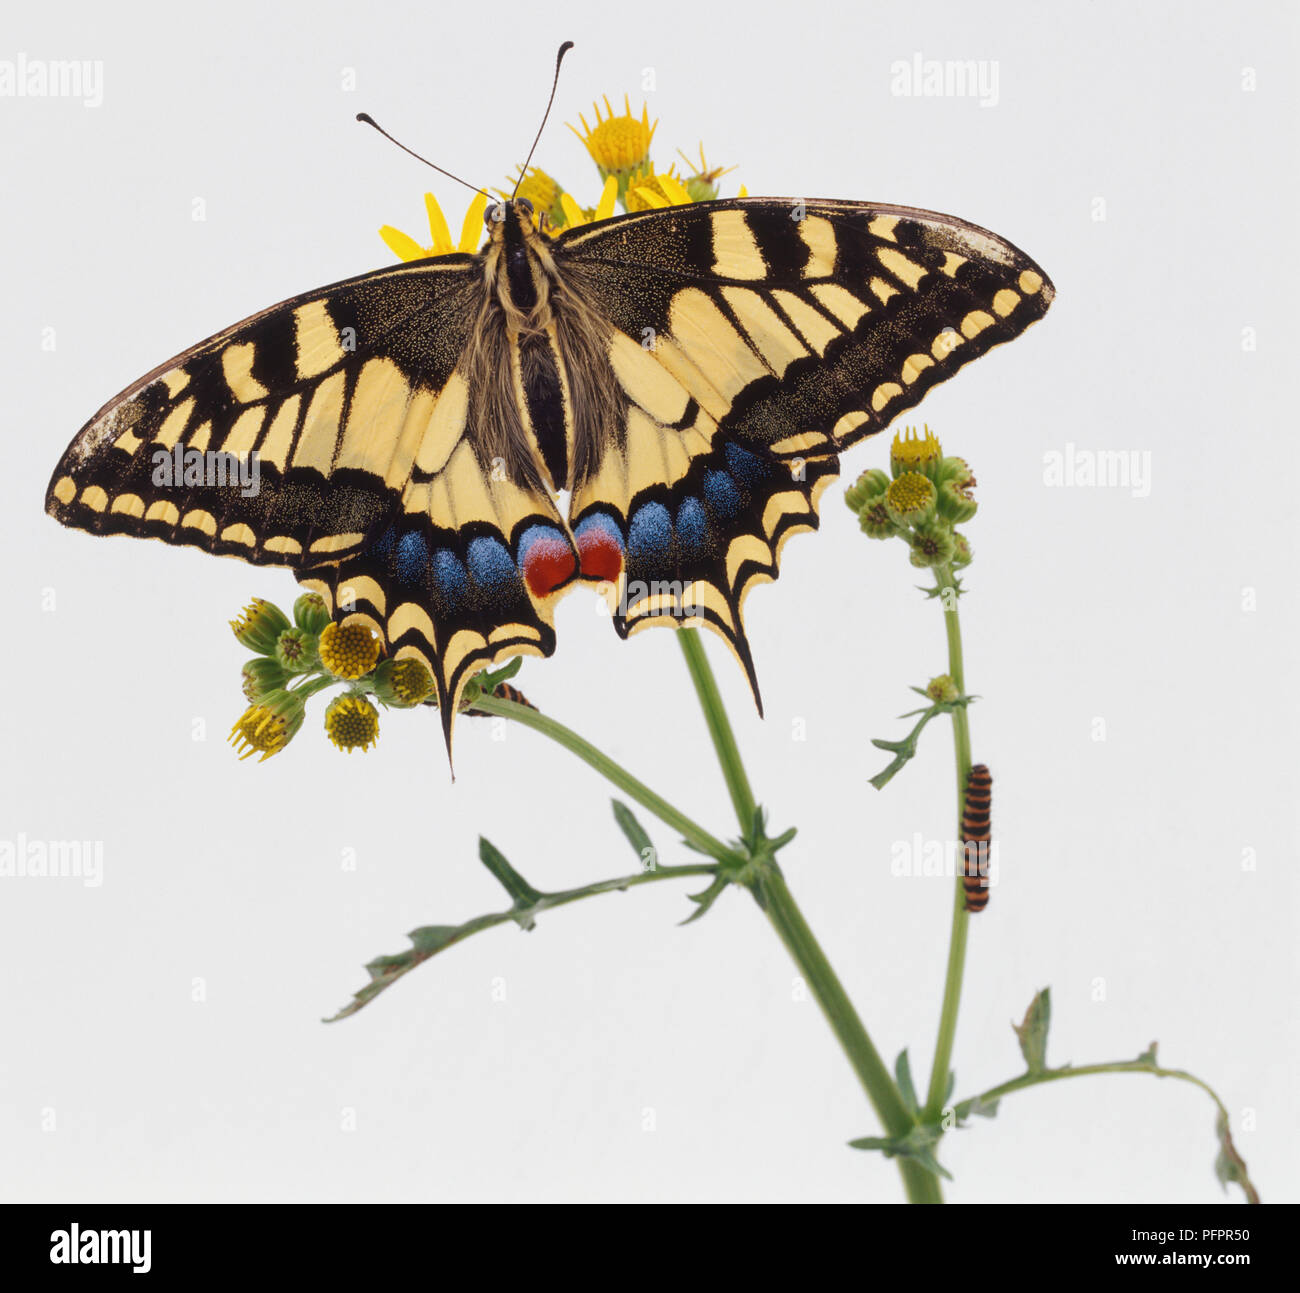 Swallowtail, Papilio machaon, a yellow and black tiger striped old world butterfly with red eyespots on its inner hindwings nectaring on a flowerhead. with scalloped tailed hindwings. Stock Photo